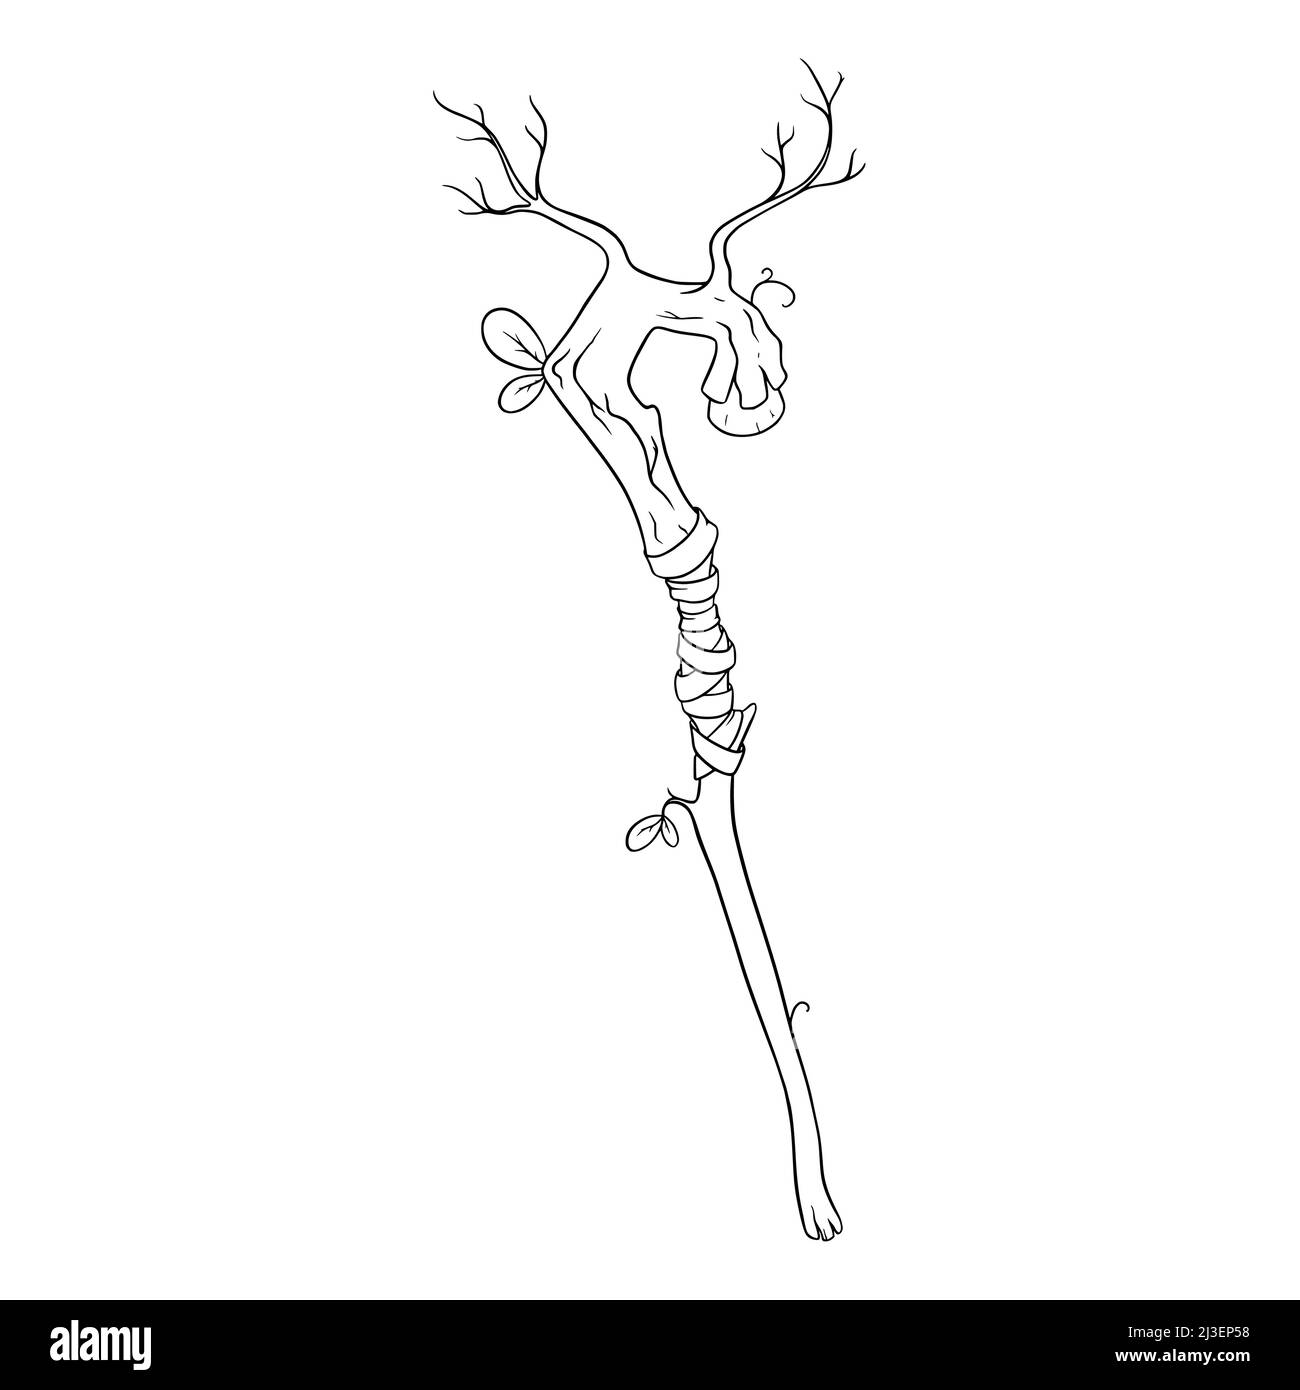 Wooden staff or walking wand for games. Sketch of druid staff. Vector illustration isolated in white background Stock Vector